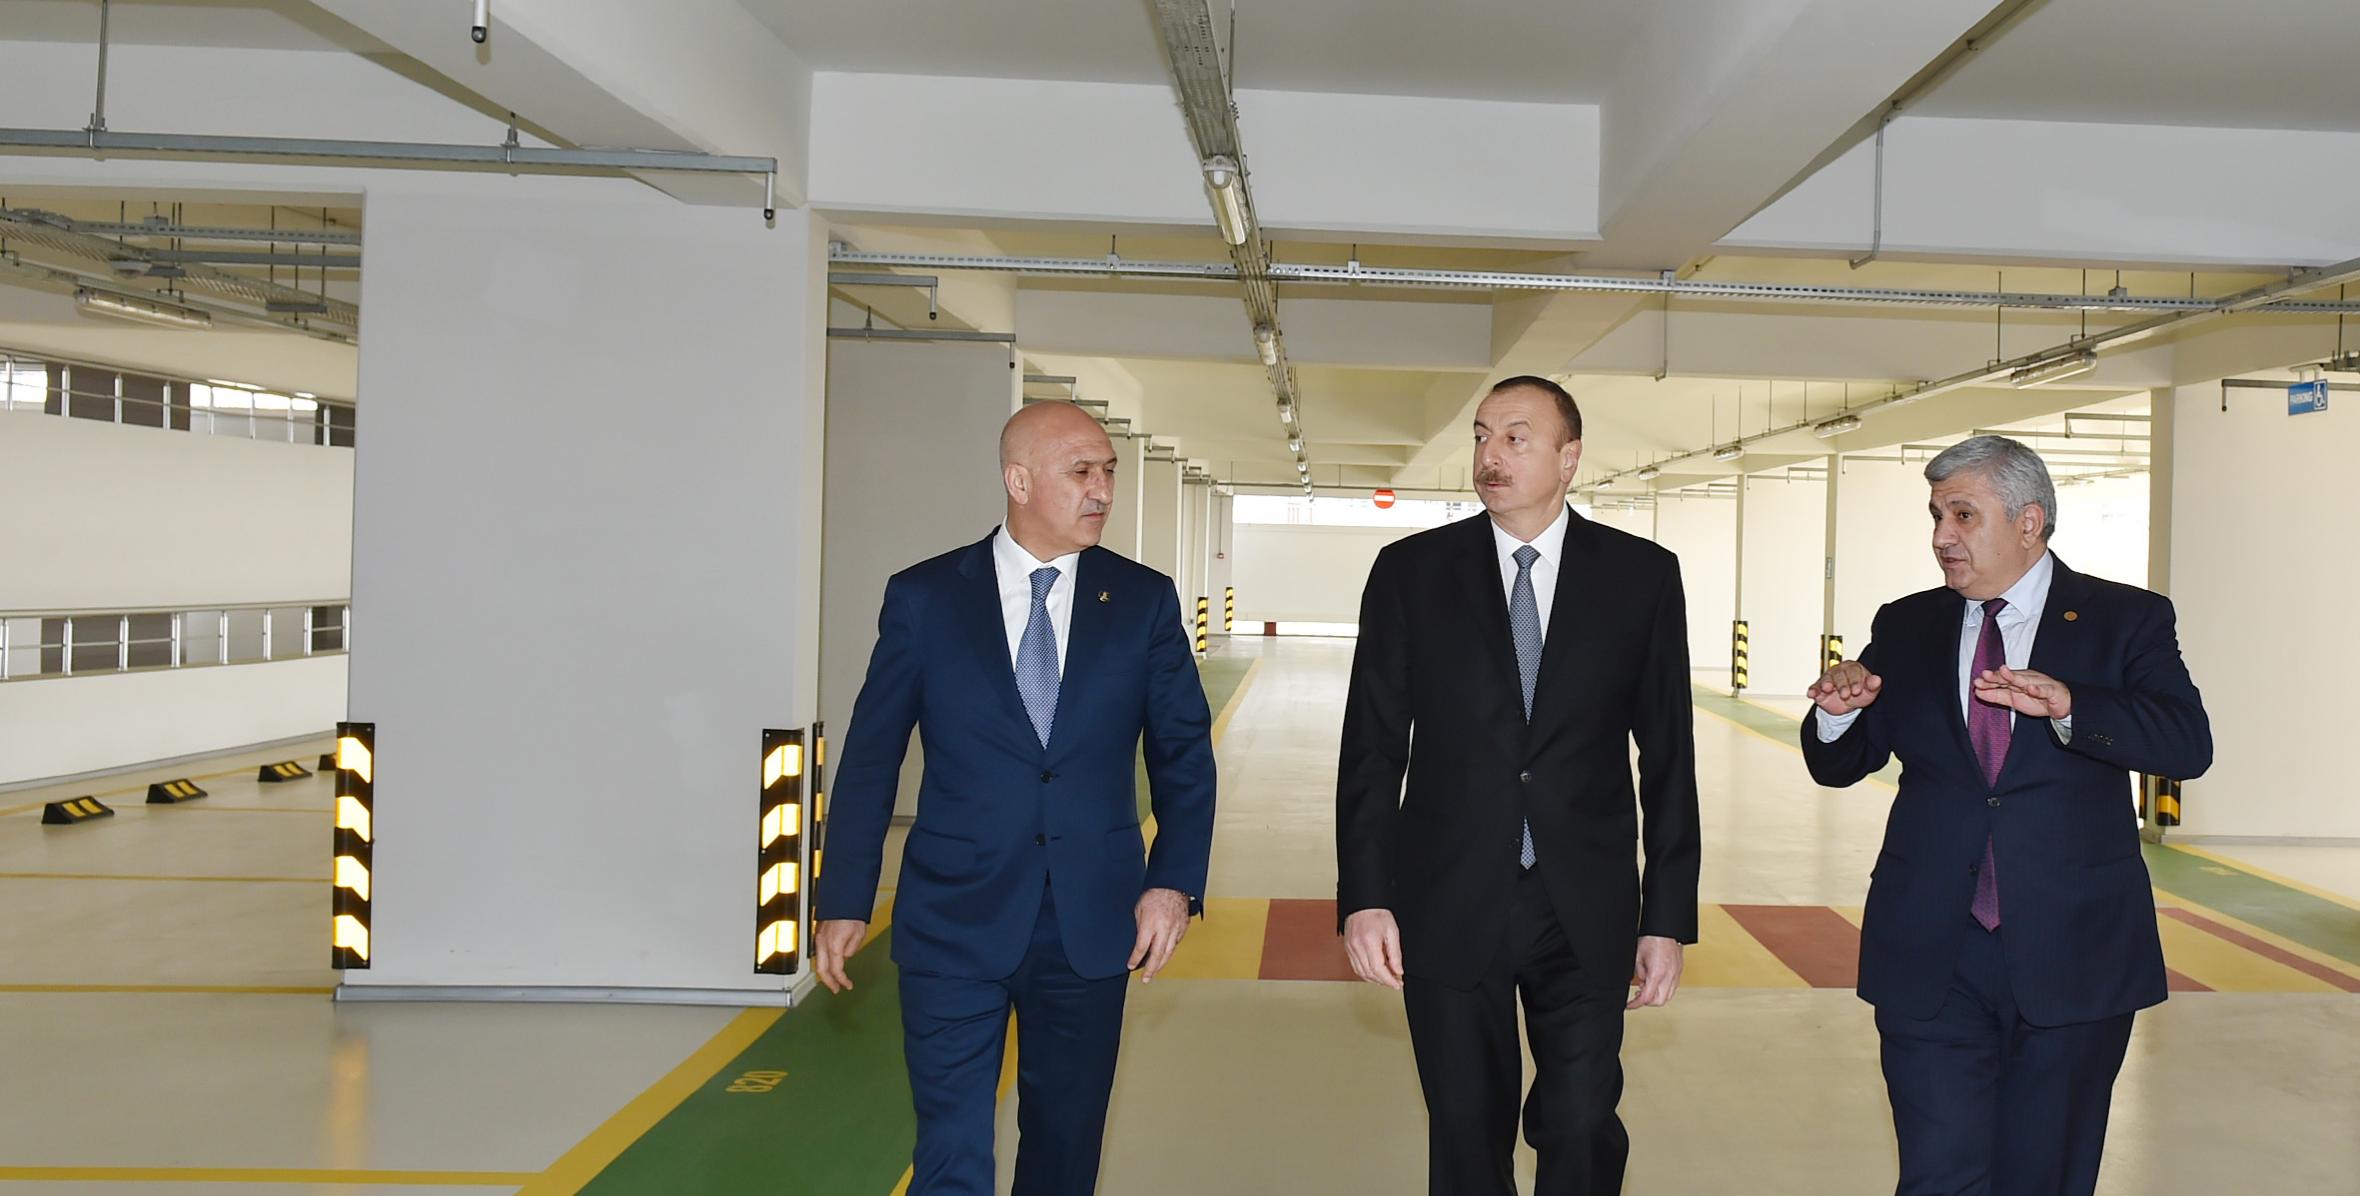 Ilham Aliyev attended the opening of multi-storey car park